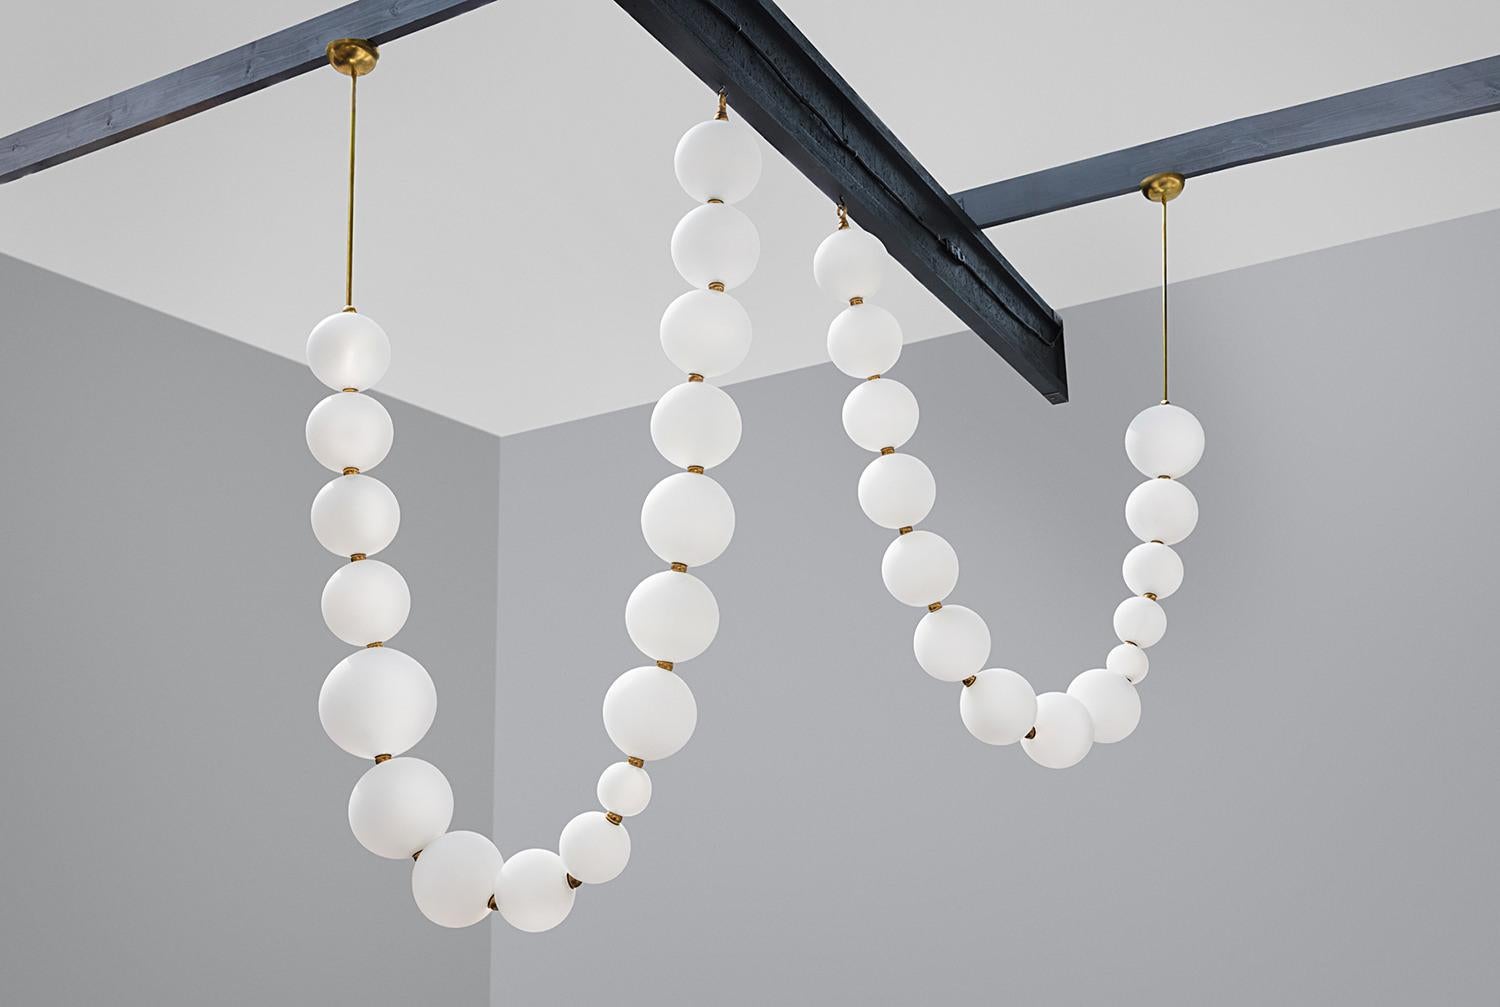 Pair of pearl necklace pendant lights - Ludovic Clément d’Armont
Every creation of Ludovic Clément d’Armont can be made to order in any requested dimensions. Please contact us for custom-made creations.
Blown glass and brass
Dimensions: glass